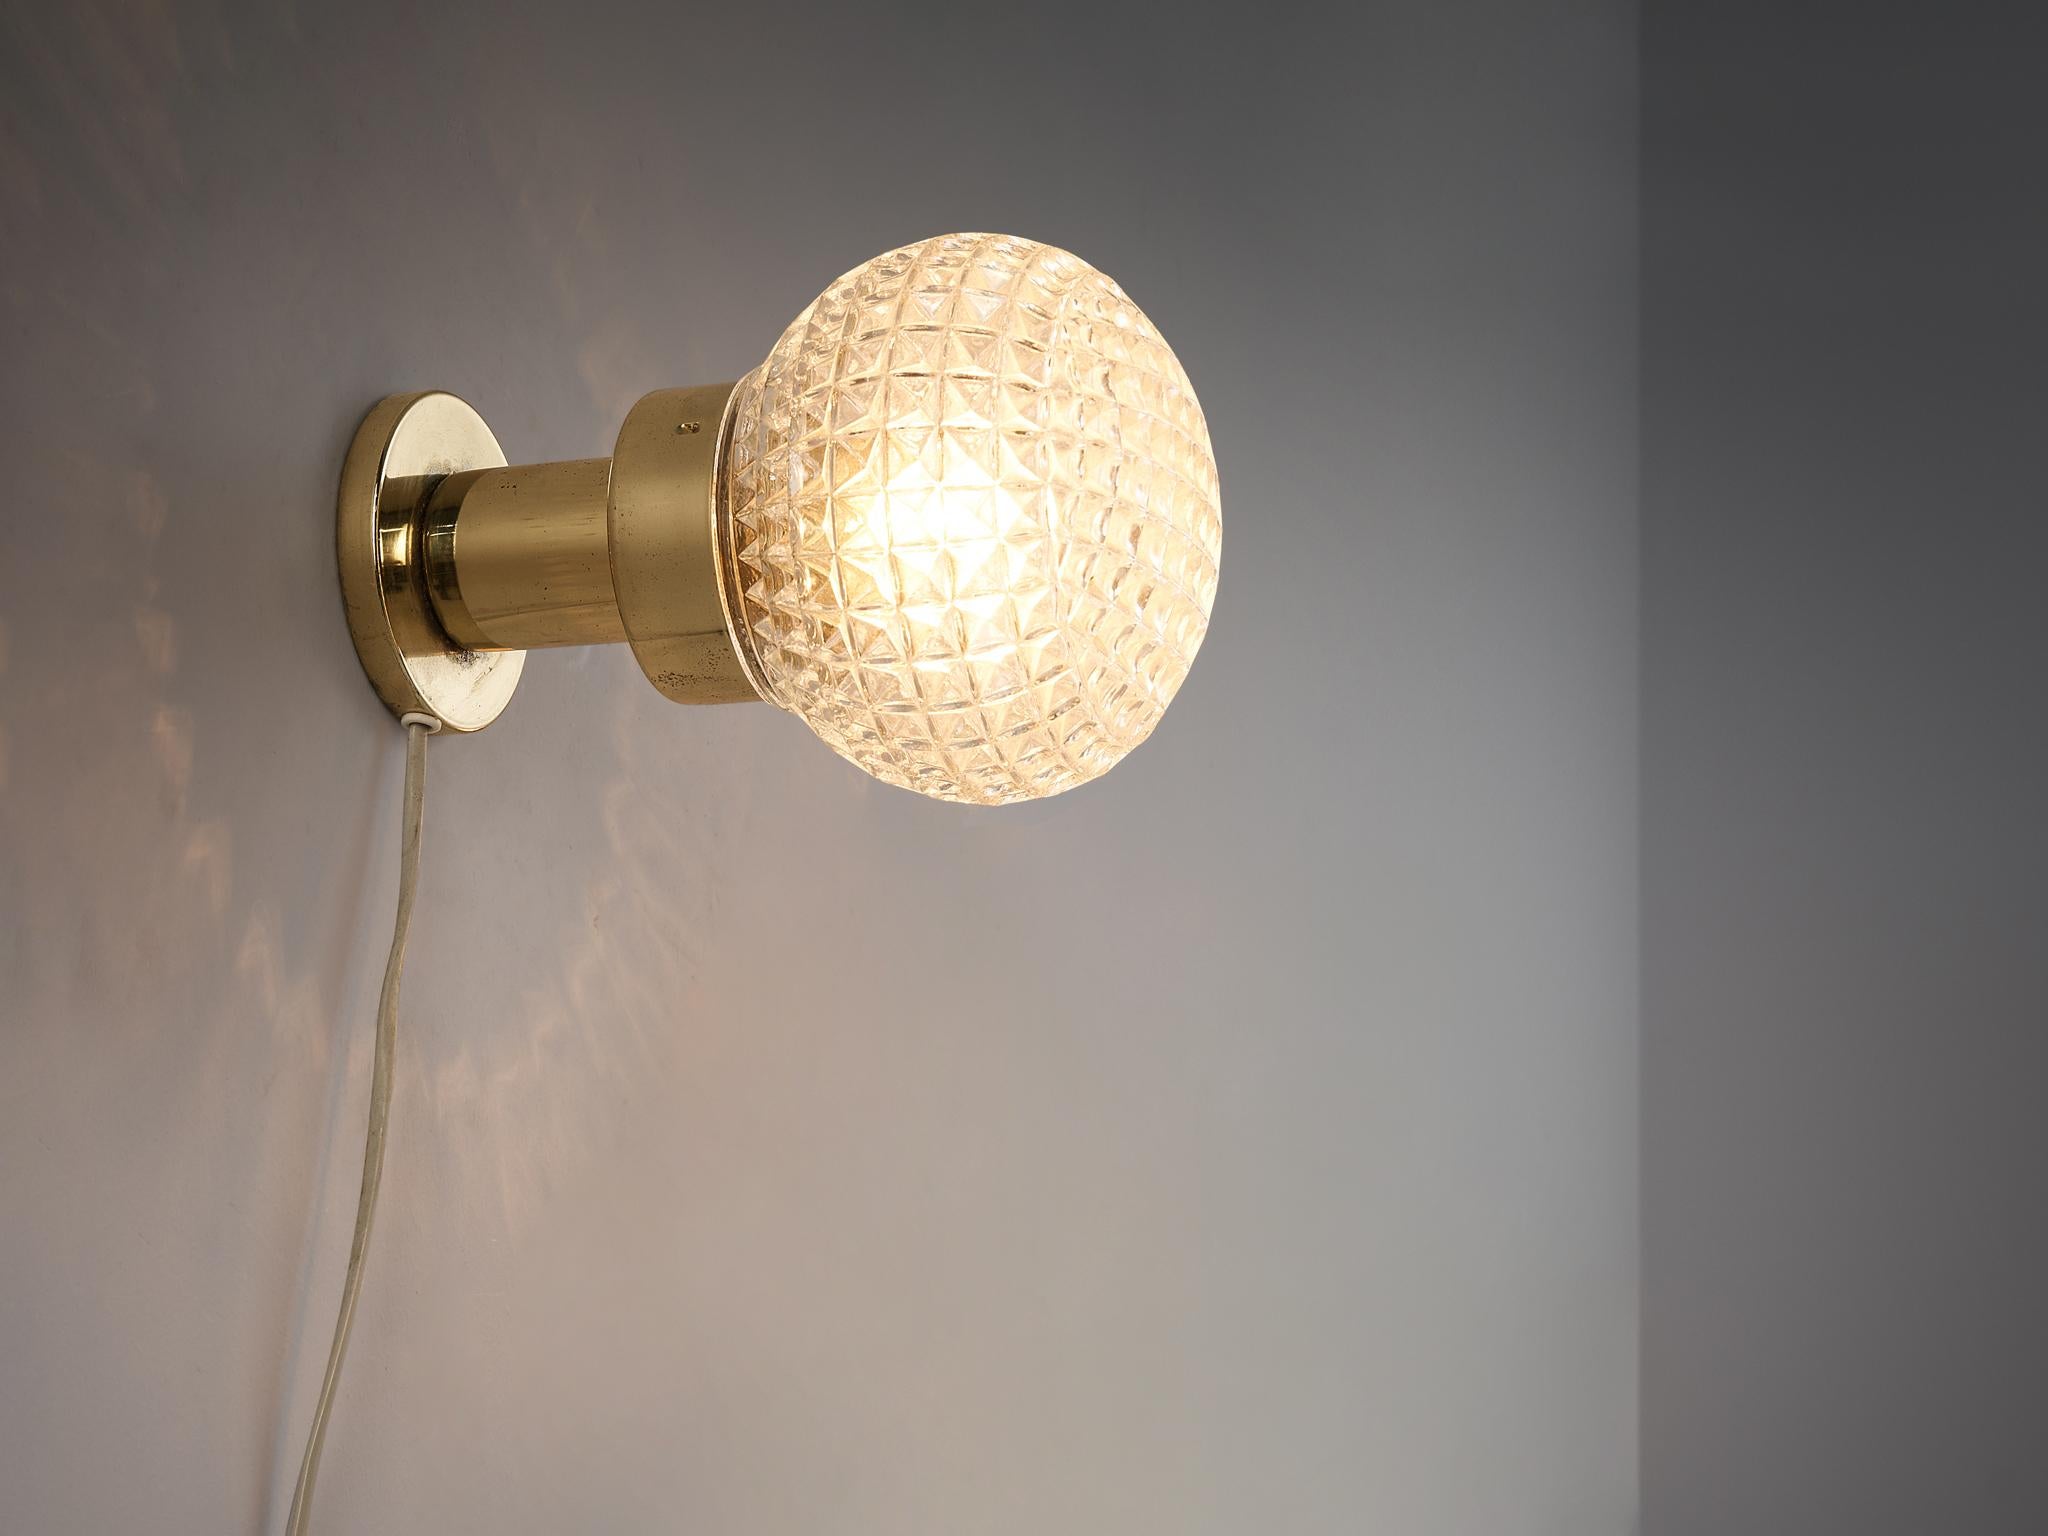 Wall light, glass, brass, metal, Czech Republic, 1960s.

This eccentric wall light is made in the 1960s in the Czech Republic. This design is based on a round construction. The structured glass orb with an ocher tone is supported by a round shaped